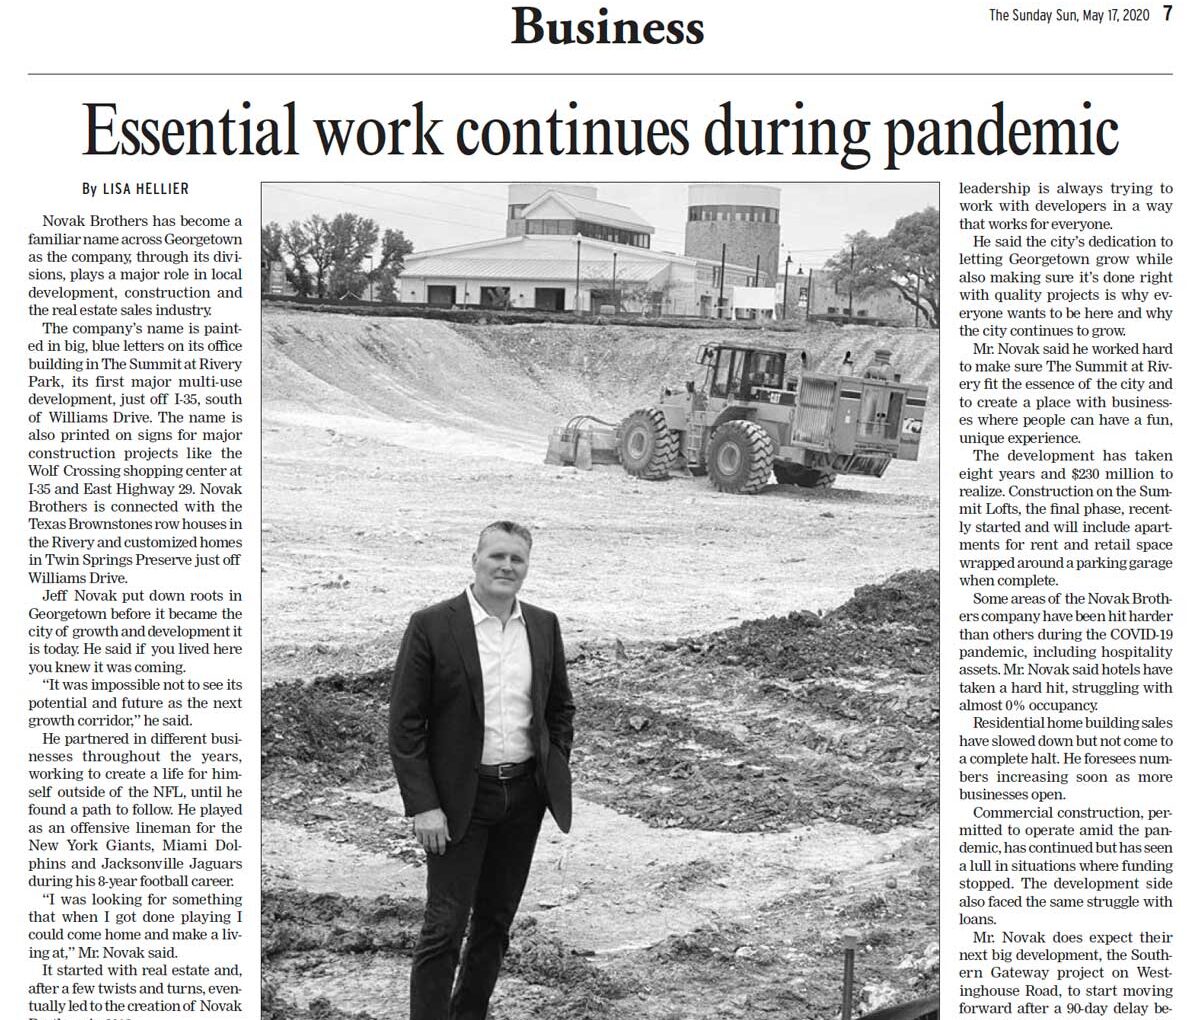 Georgetown Sun: Essential Work Continues During Pandemic